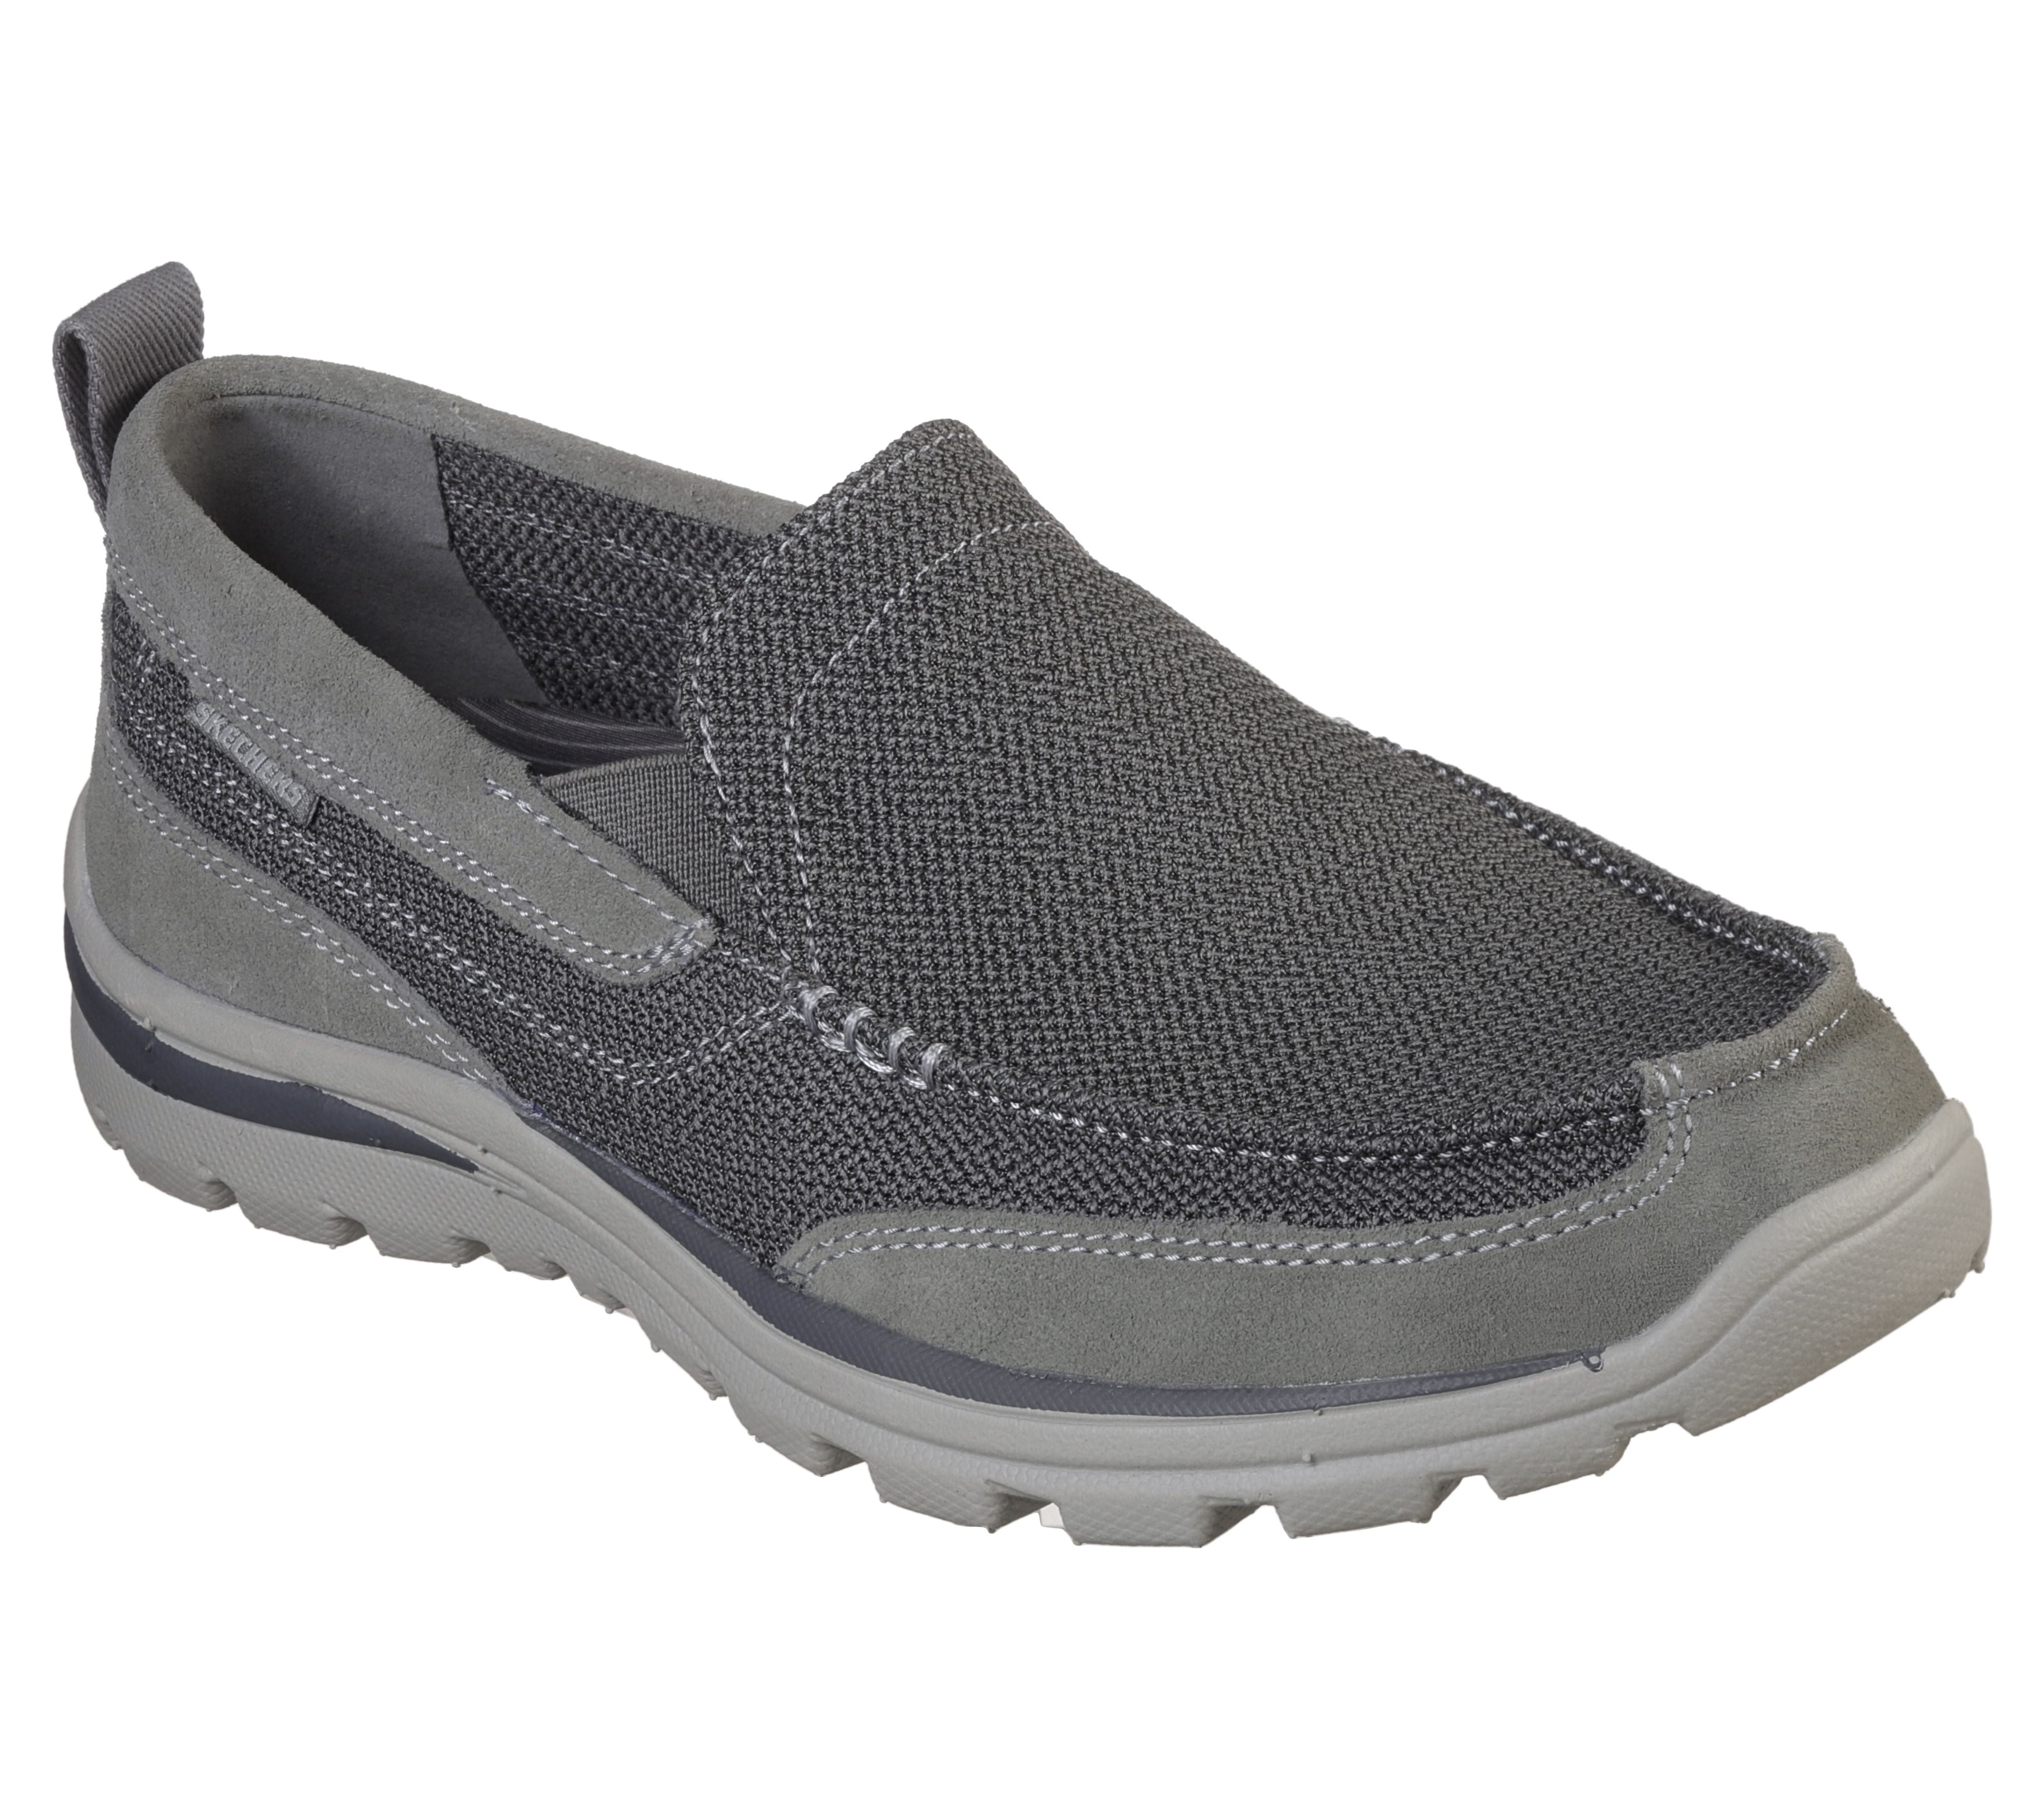 Skechers Men's Relaxed Fit Superior Milford Casual Slip-on Sneaker